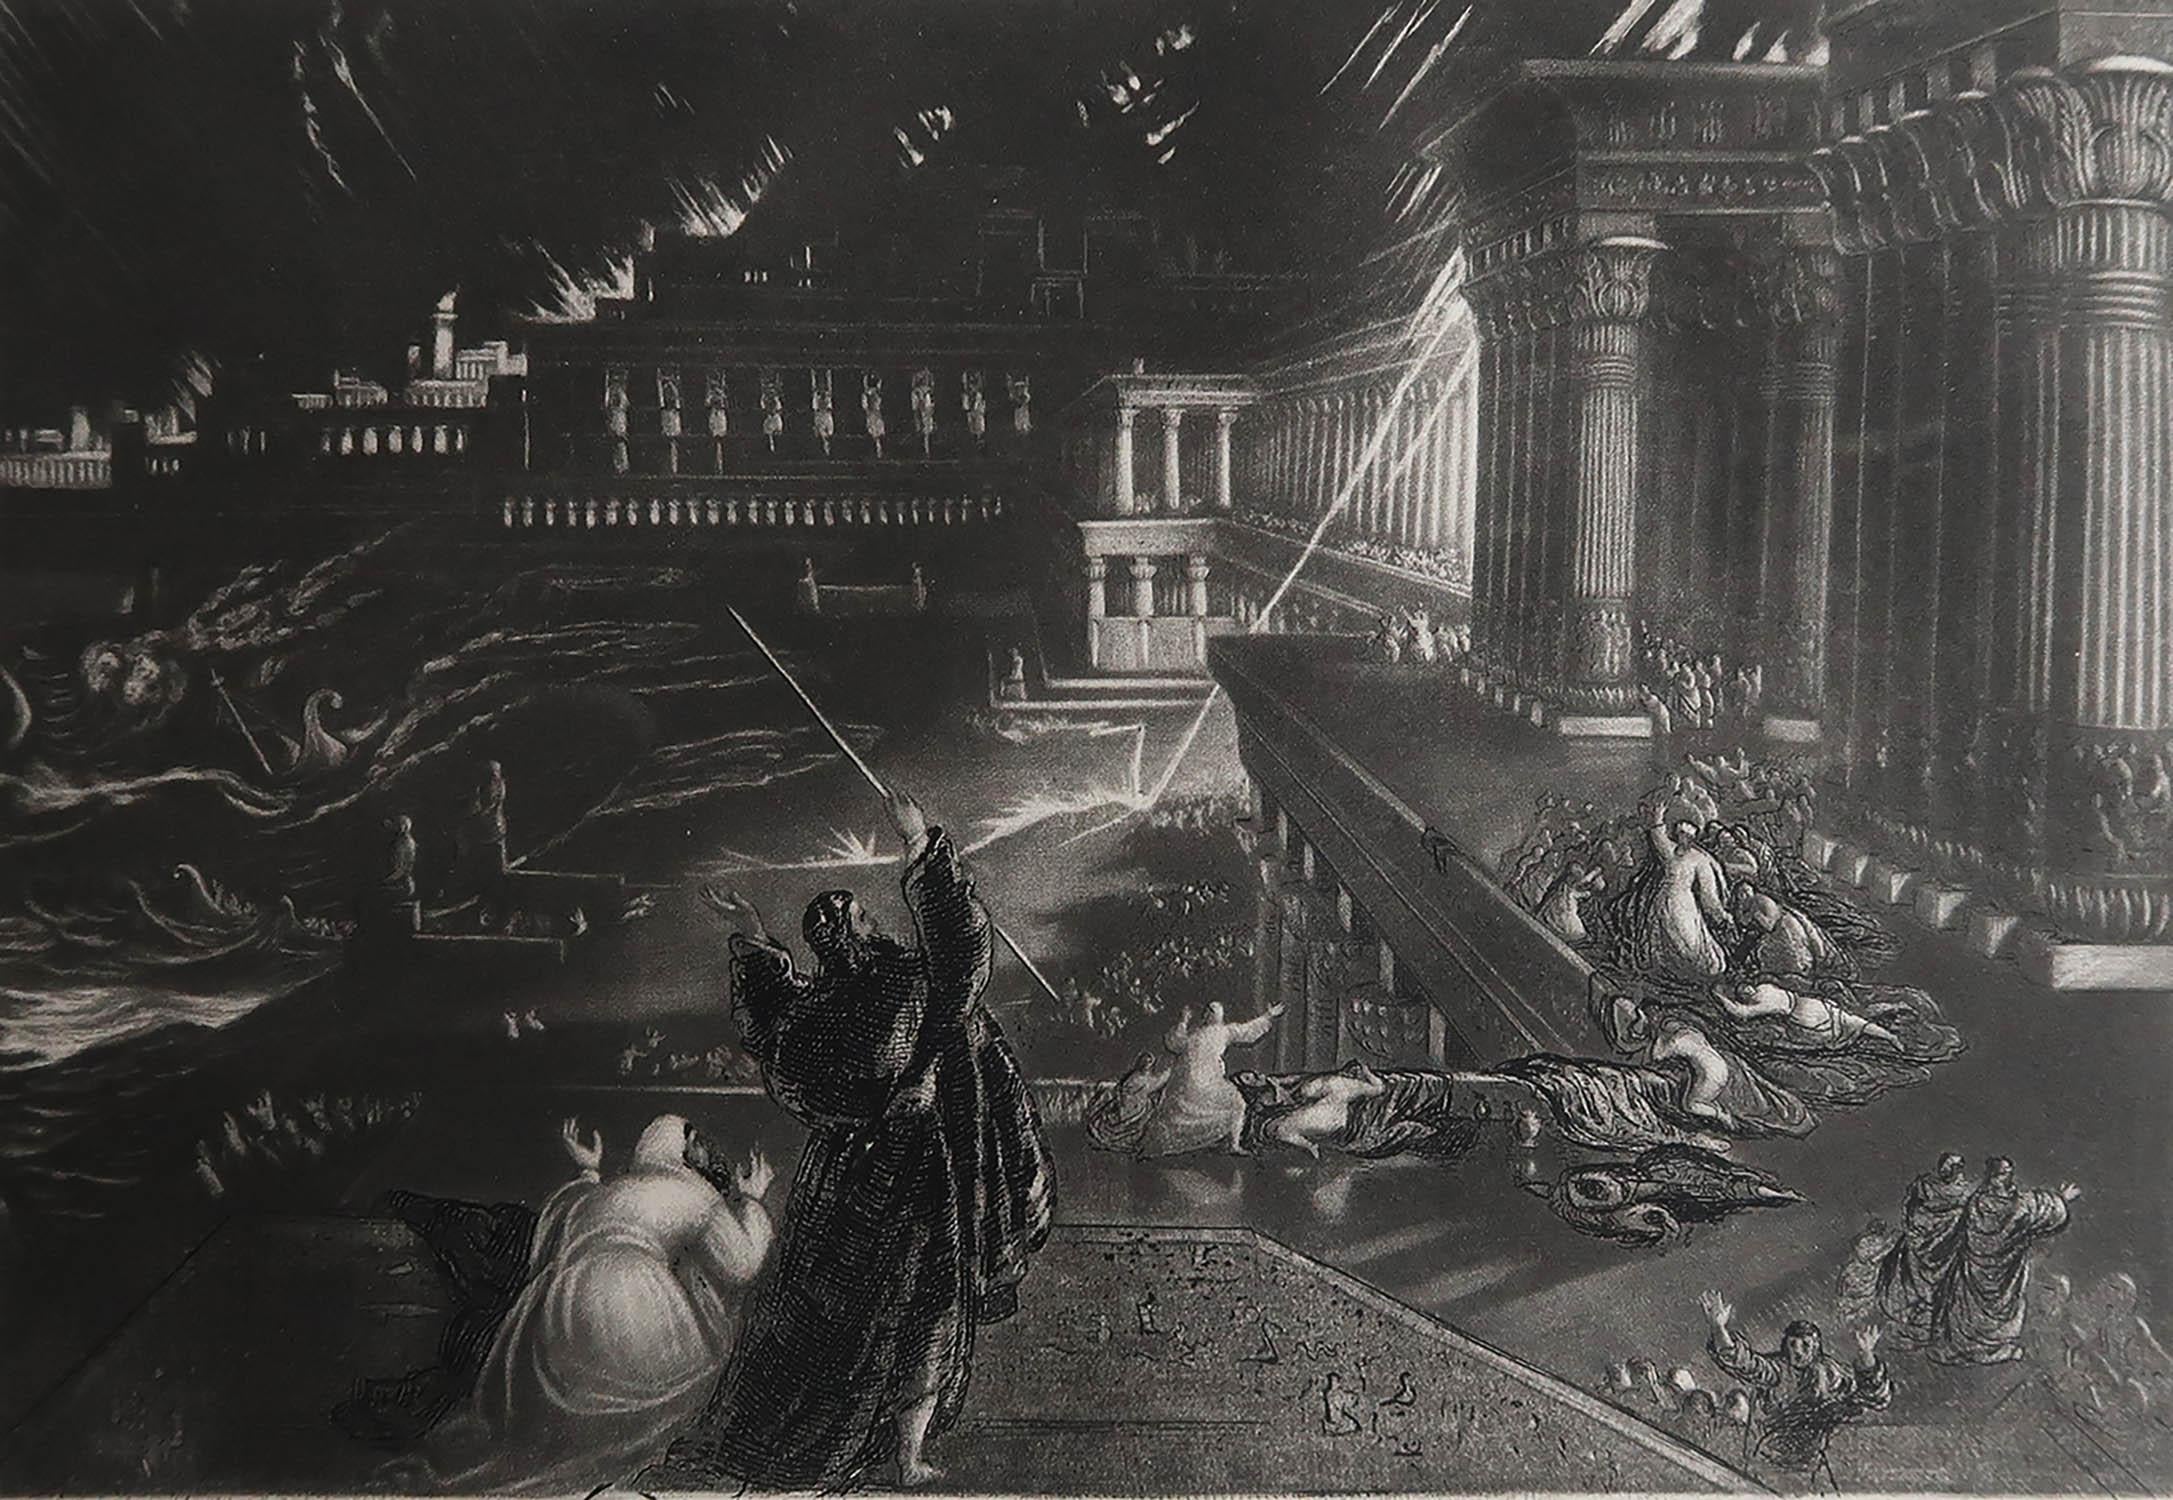 Sensational image by John Martin.

Drawn and engraved by John Martin. 

Published by Sangster.

Unframed.

